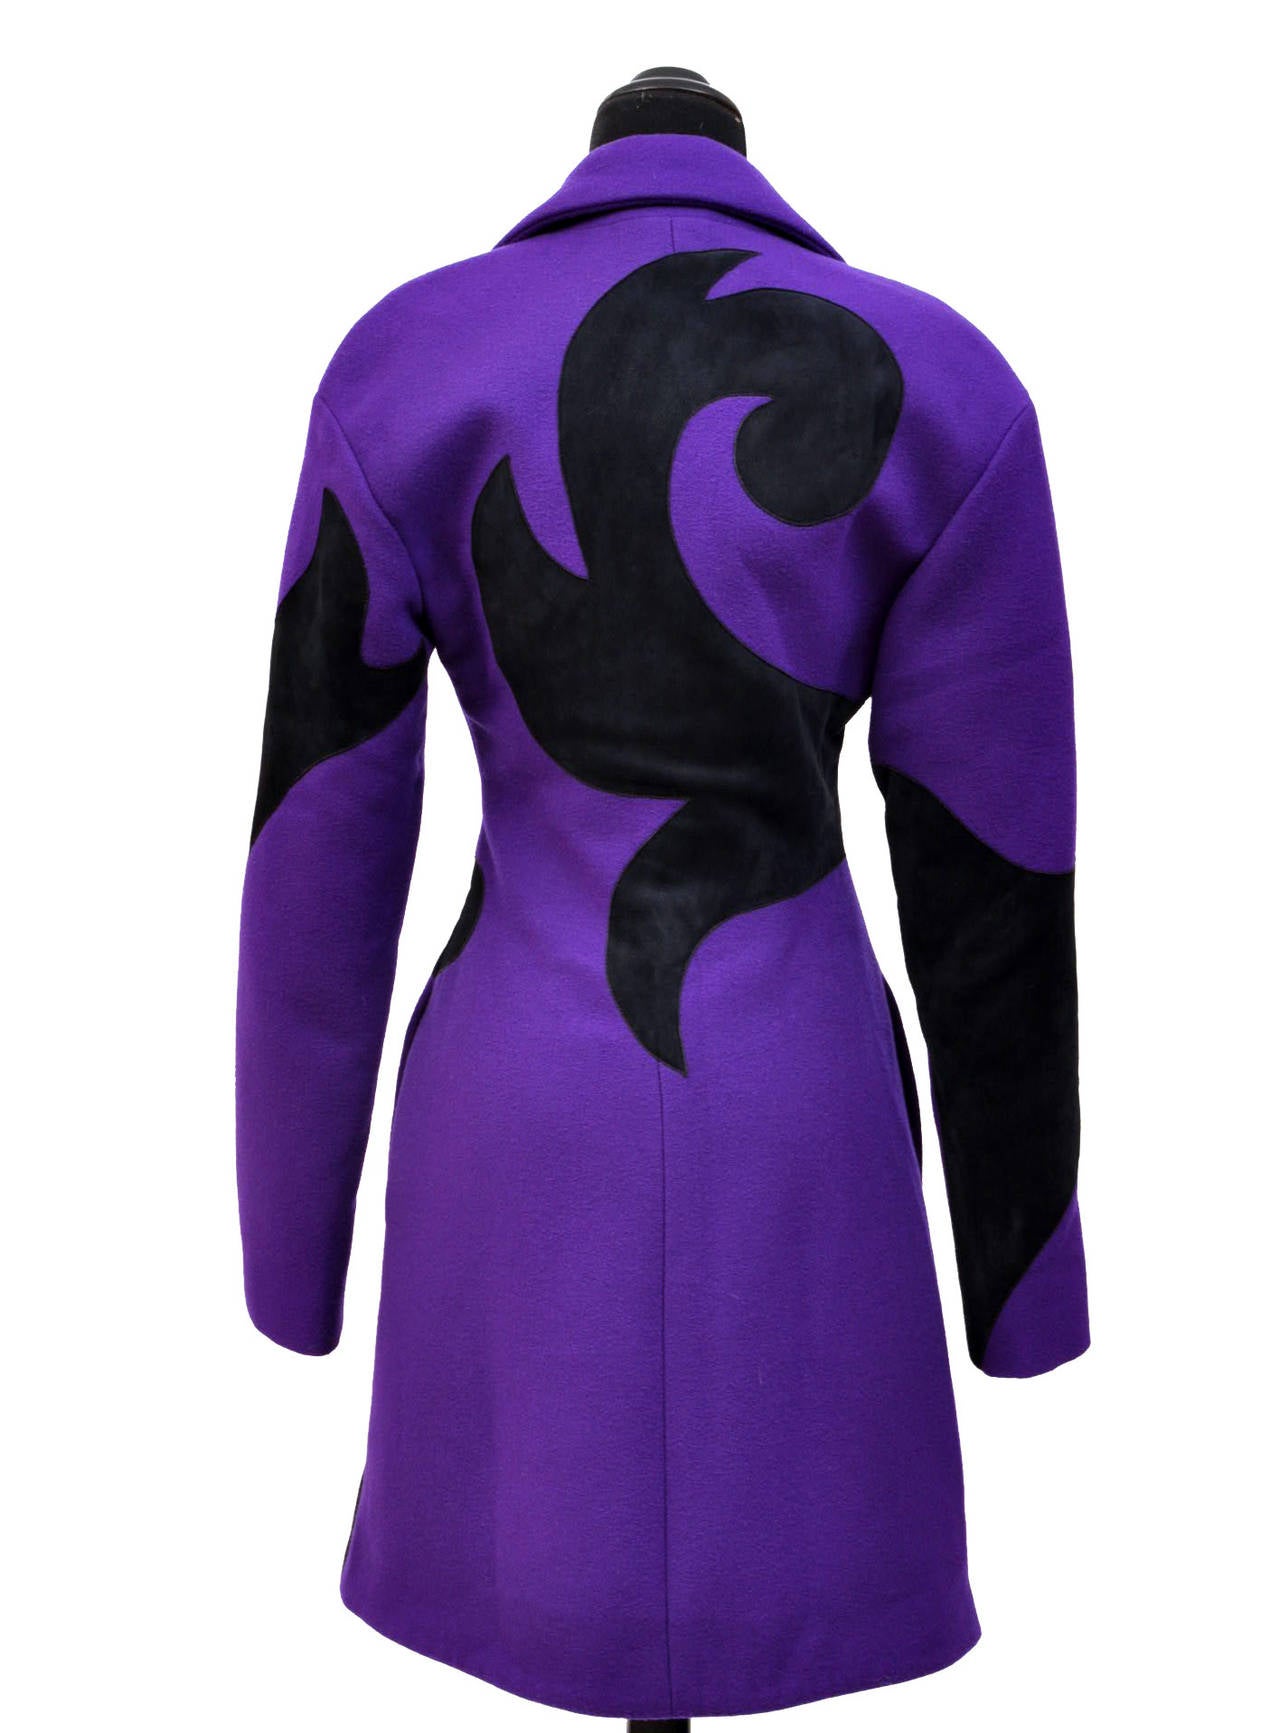 F/W 2011 look #20 NEW VERSACE VIOLET WOOL COAT with SUEDE 38 - 4 For Sale 2